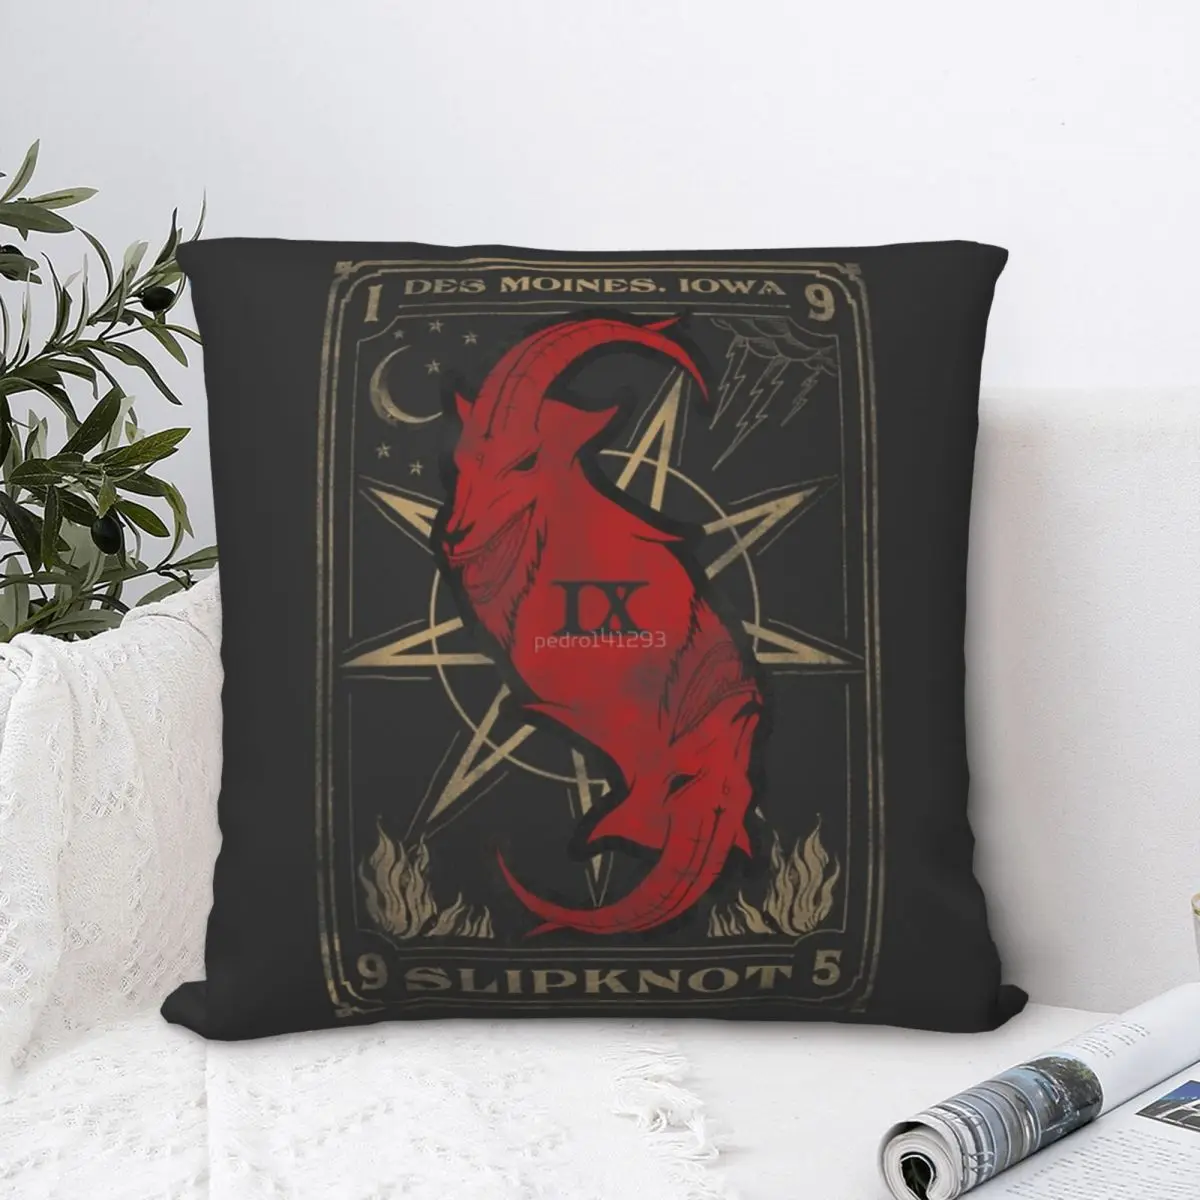 Tarot Card Goat Square Pillowcase Polyester Pillow Cover Velvet Cushion Zip Decorative Comfort Throw Pillow For Home Car rugbrisbane square pillowcase polyester pillow cover velvet cushion zip decorative comfort throw pillow for home car